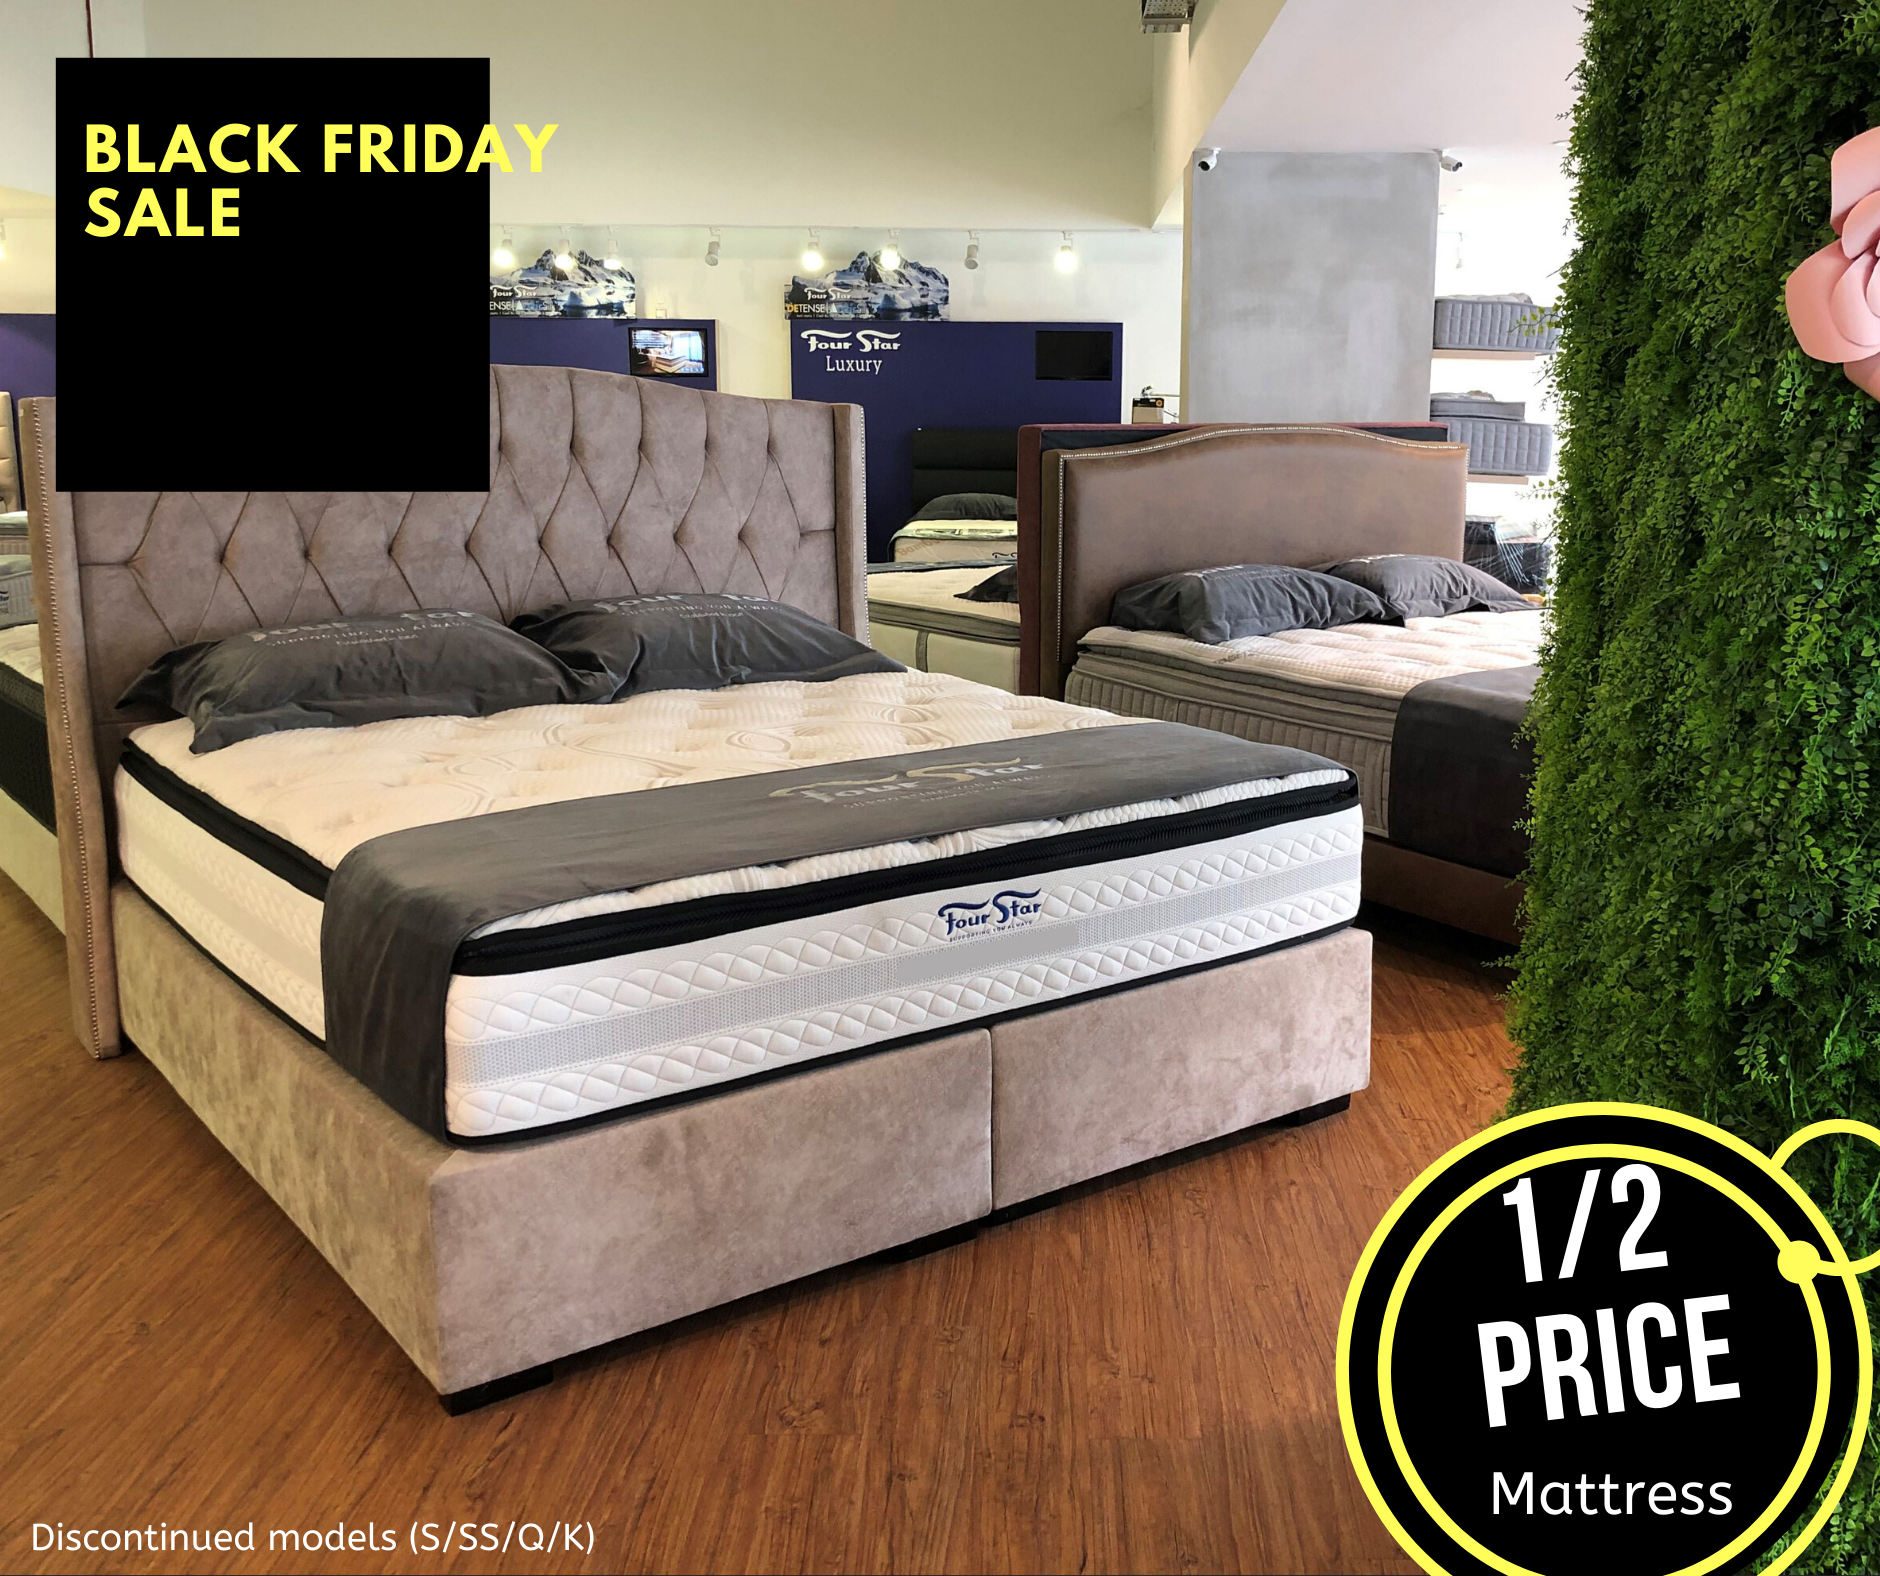 2 DAYS ONLY! 16 – 17 NOV Four Star Mattress Gallery is having Pre BLACK FRIDAY SALE with its largest discount this year! - 4